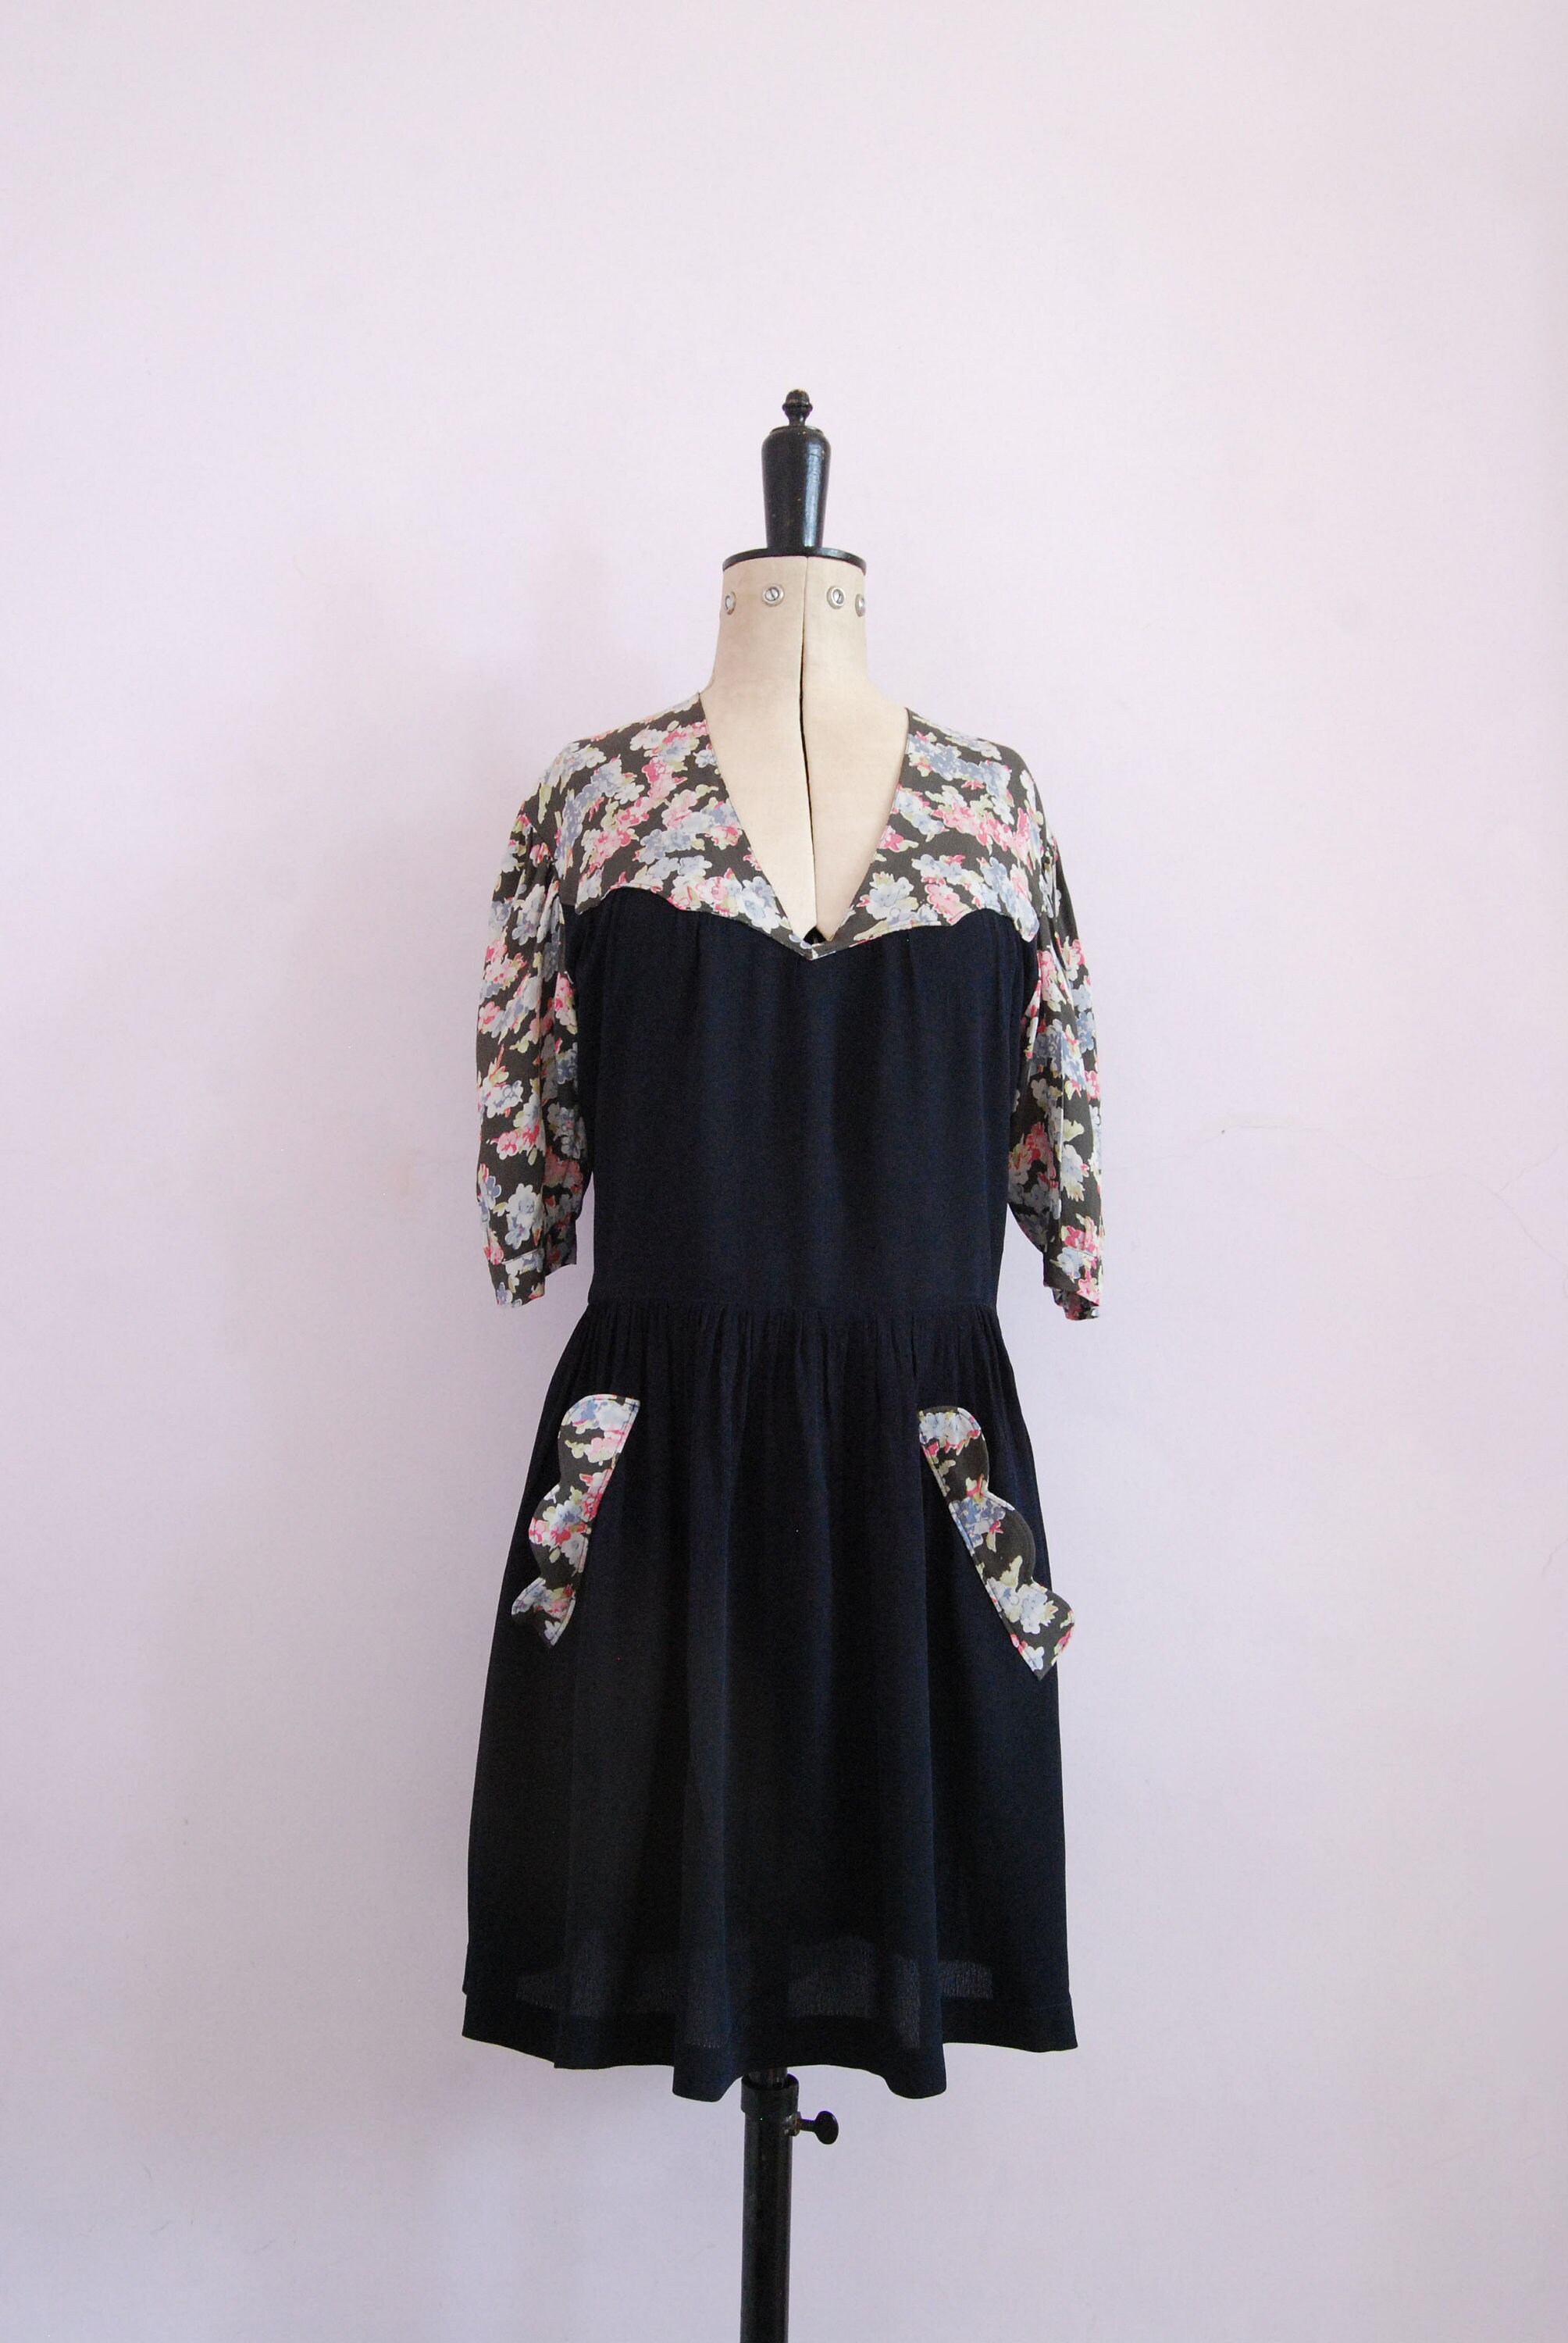 Vintage 1940s Style Rayon Crepe Black Floral Dress 1940s Day - Etsy